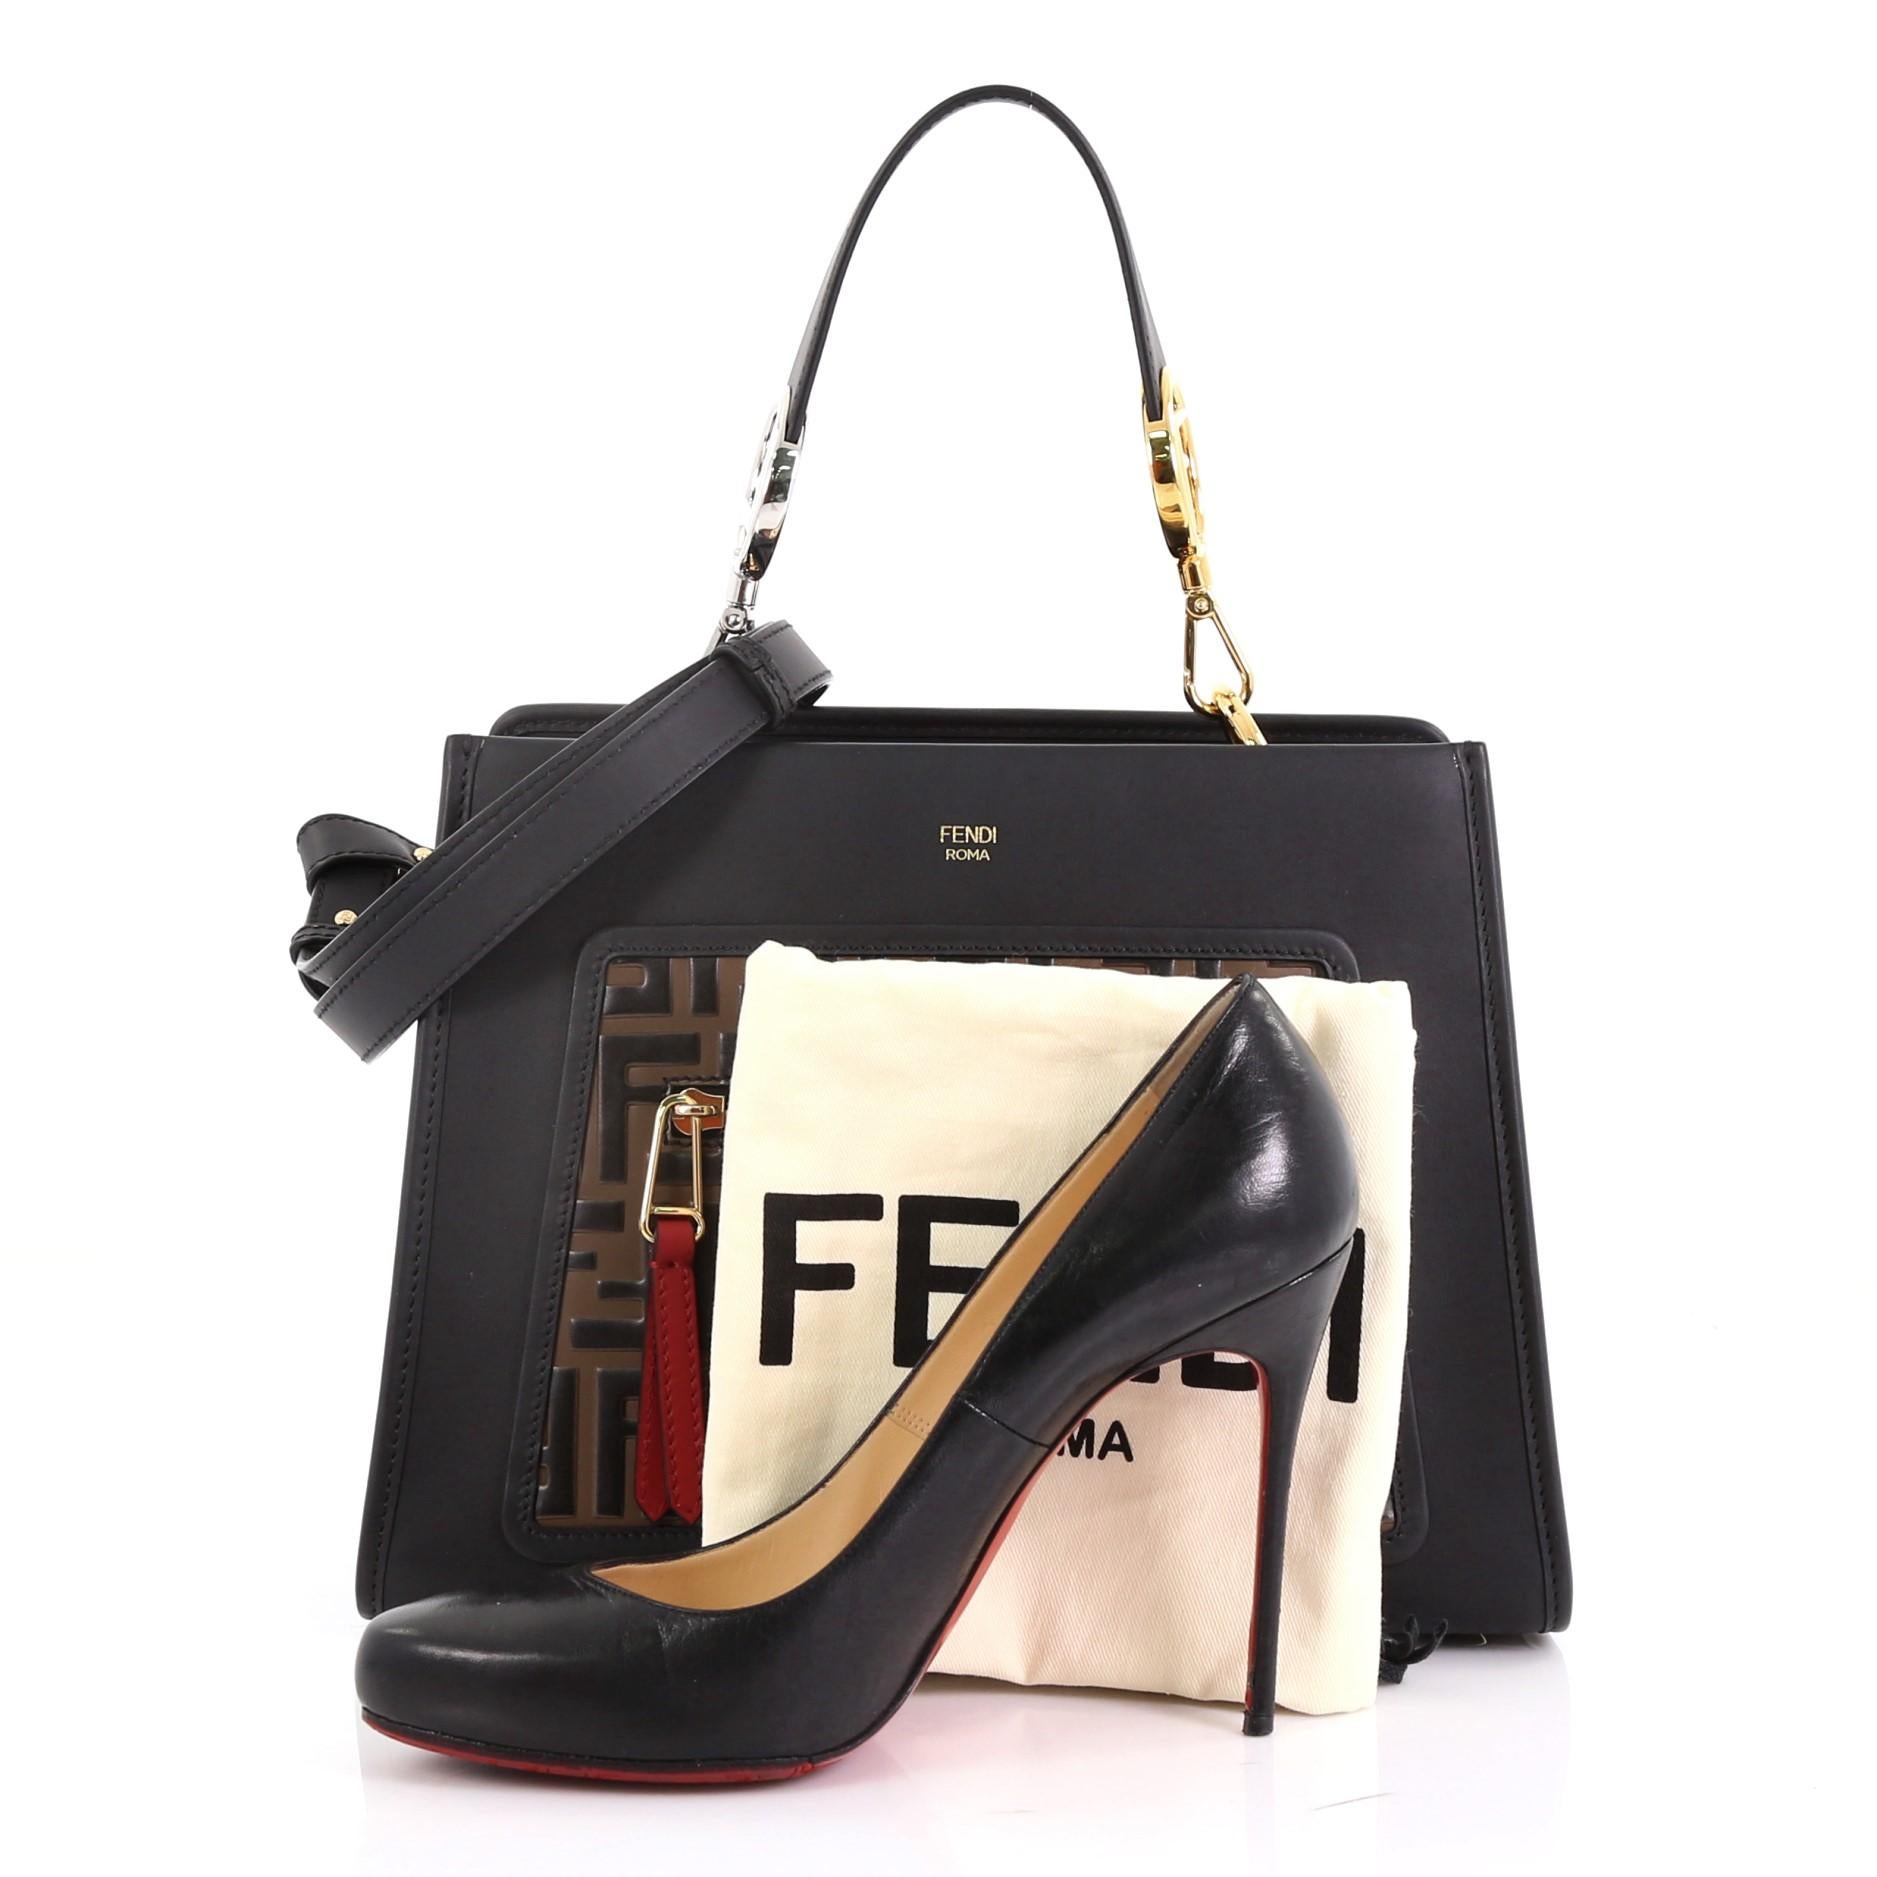 This Fendi Runaway Handbag Leather and Logo Embossed Leather Small, crafted in black and brown leather and logo embossed leather, features a removable flat top handle, exterior zip pocket, protective base studs, and silver and gold-tone hardware.